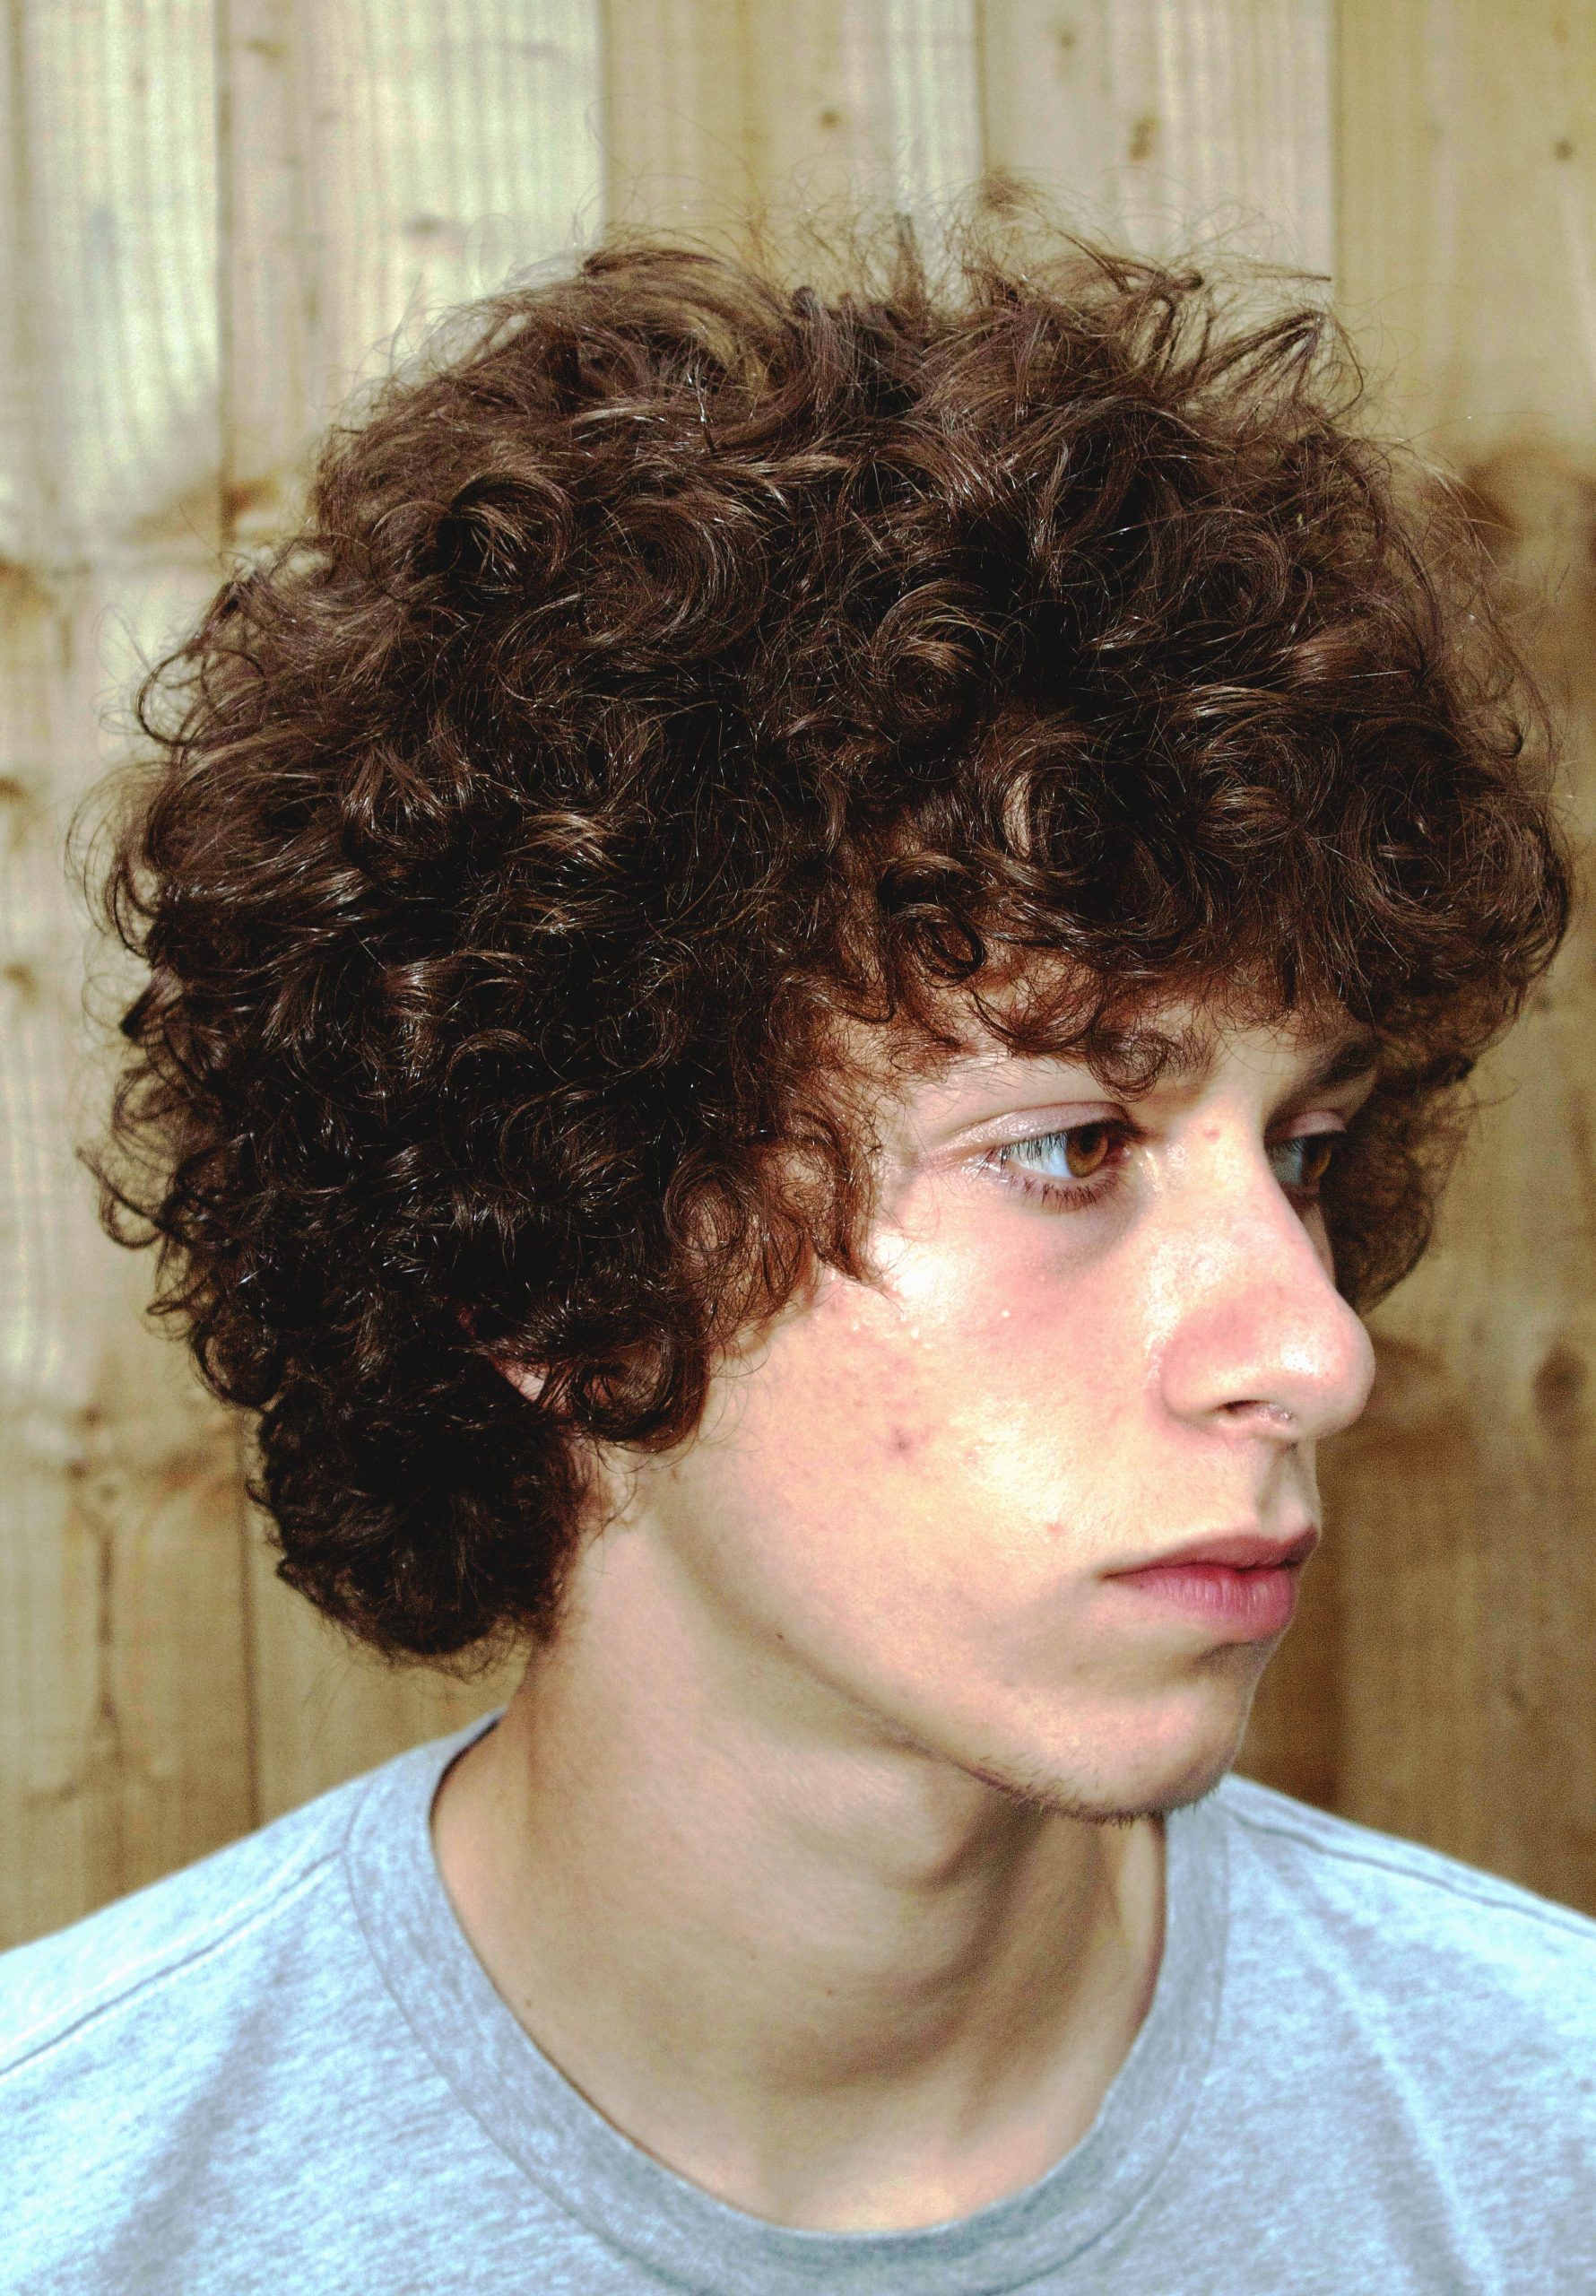 perm hairstyle for men 227 scaled Asian male perm Hairstyles | Best perm hairstyles | perm hairstyles Perm hairstyles for Men